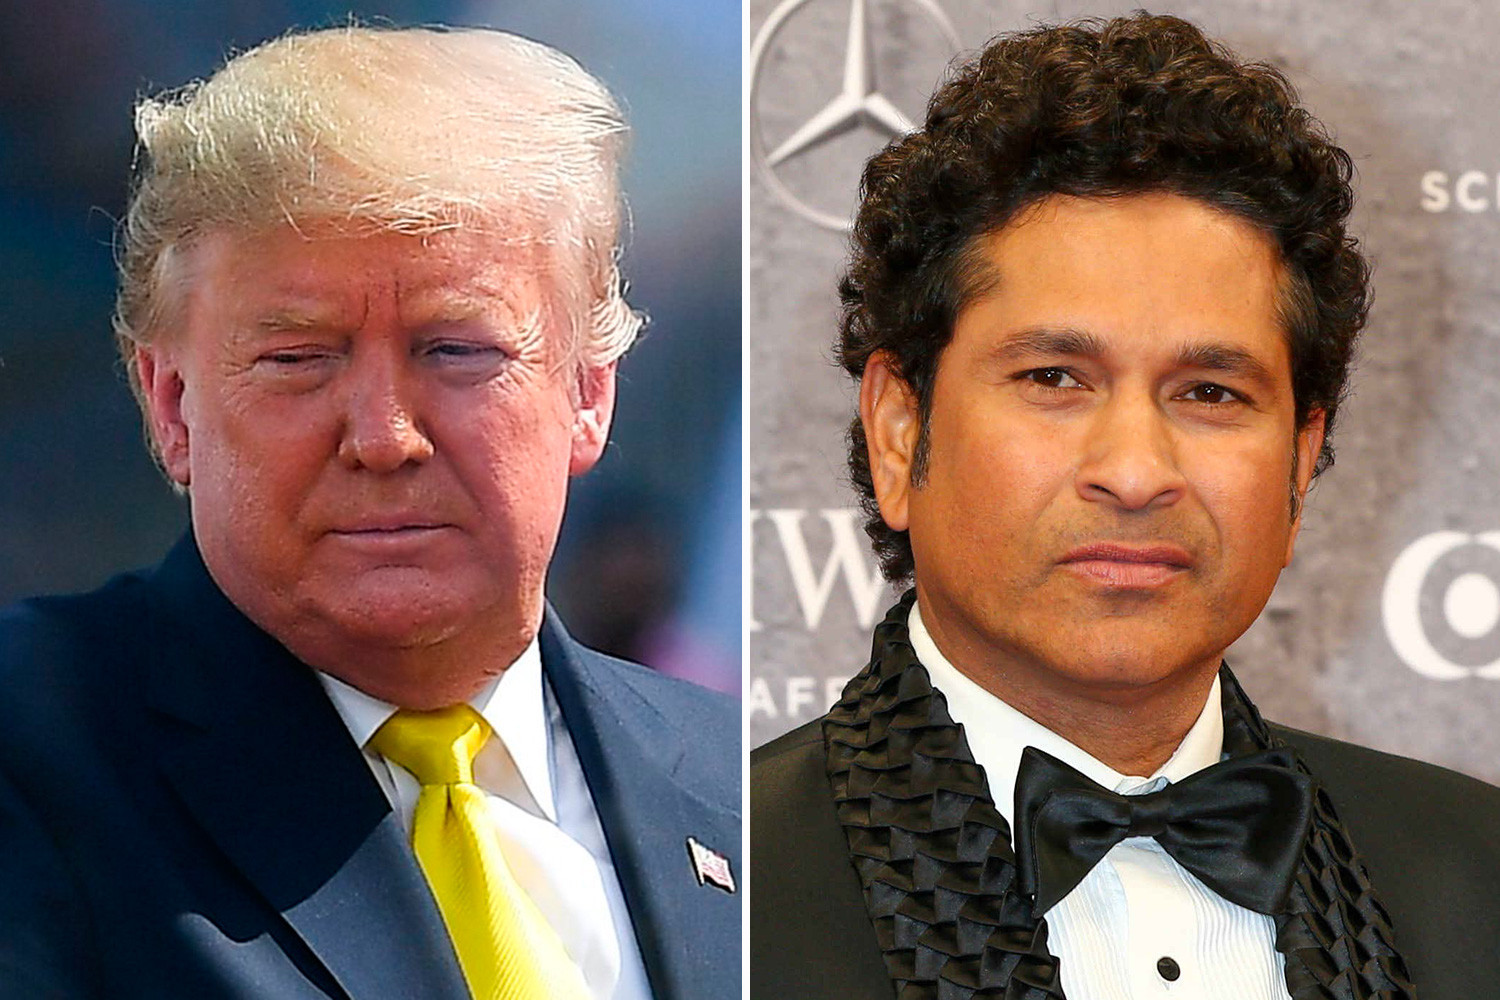 , Watch Donald Trump hilariously try and fail to pronounce Sachin Tendulkar on US presidents tour of India